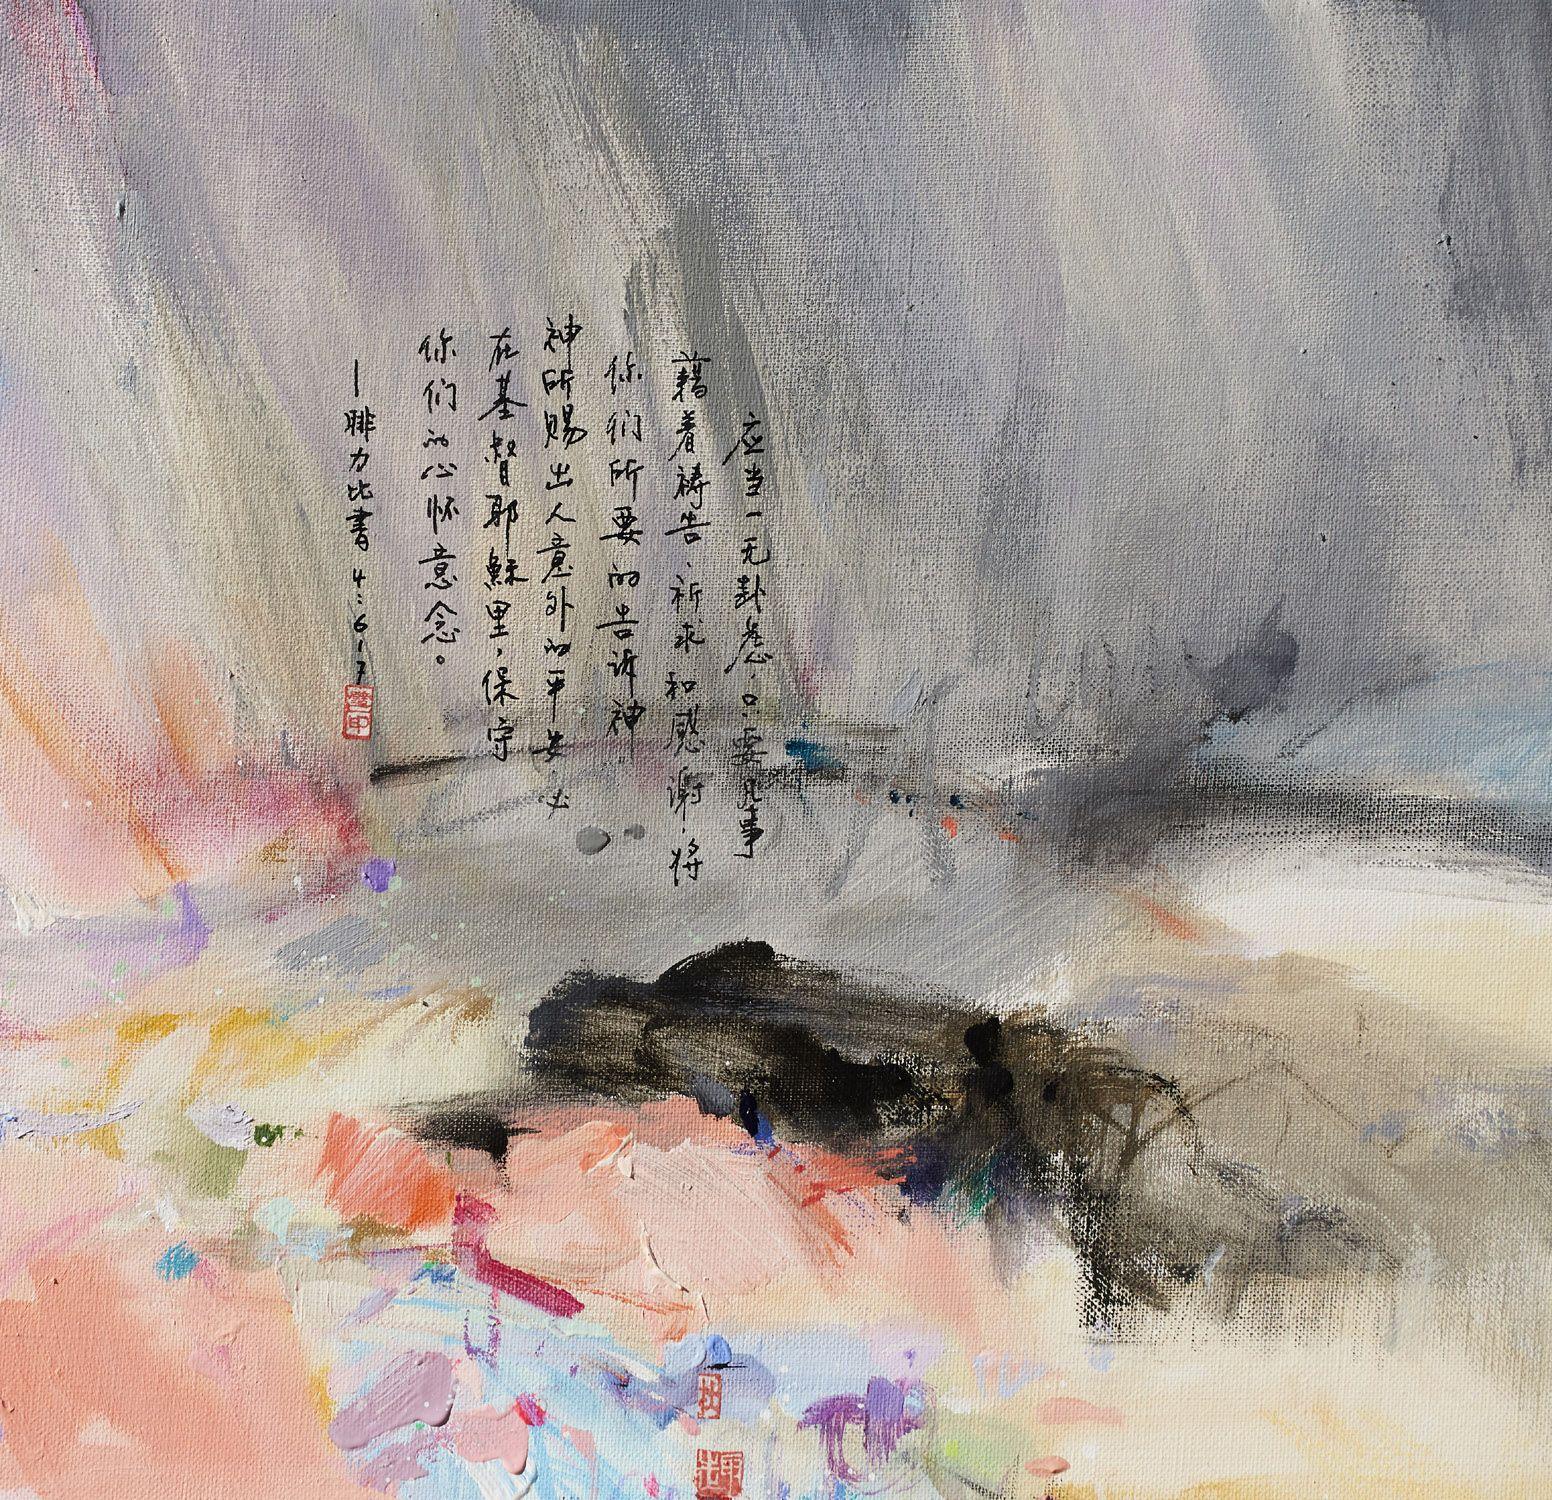 An imaginary landscape painting, bold brushwork with rich, delicate detail. I am inspired by prayer and bible verses which in English, Chinese and French, give this original painting additional meaning. Original sold in USA.  Limited edition fine